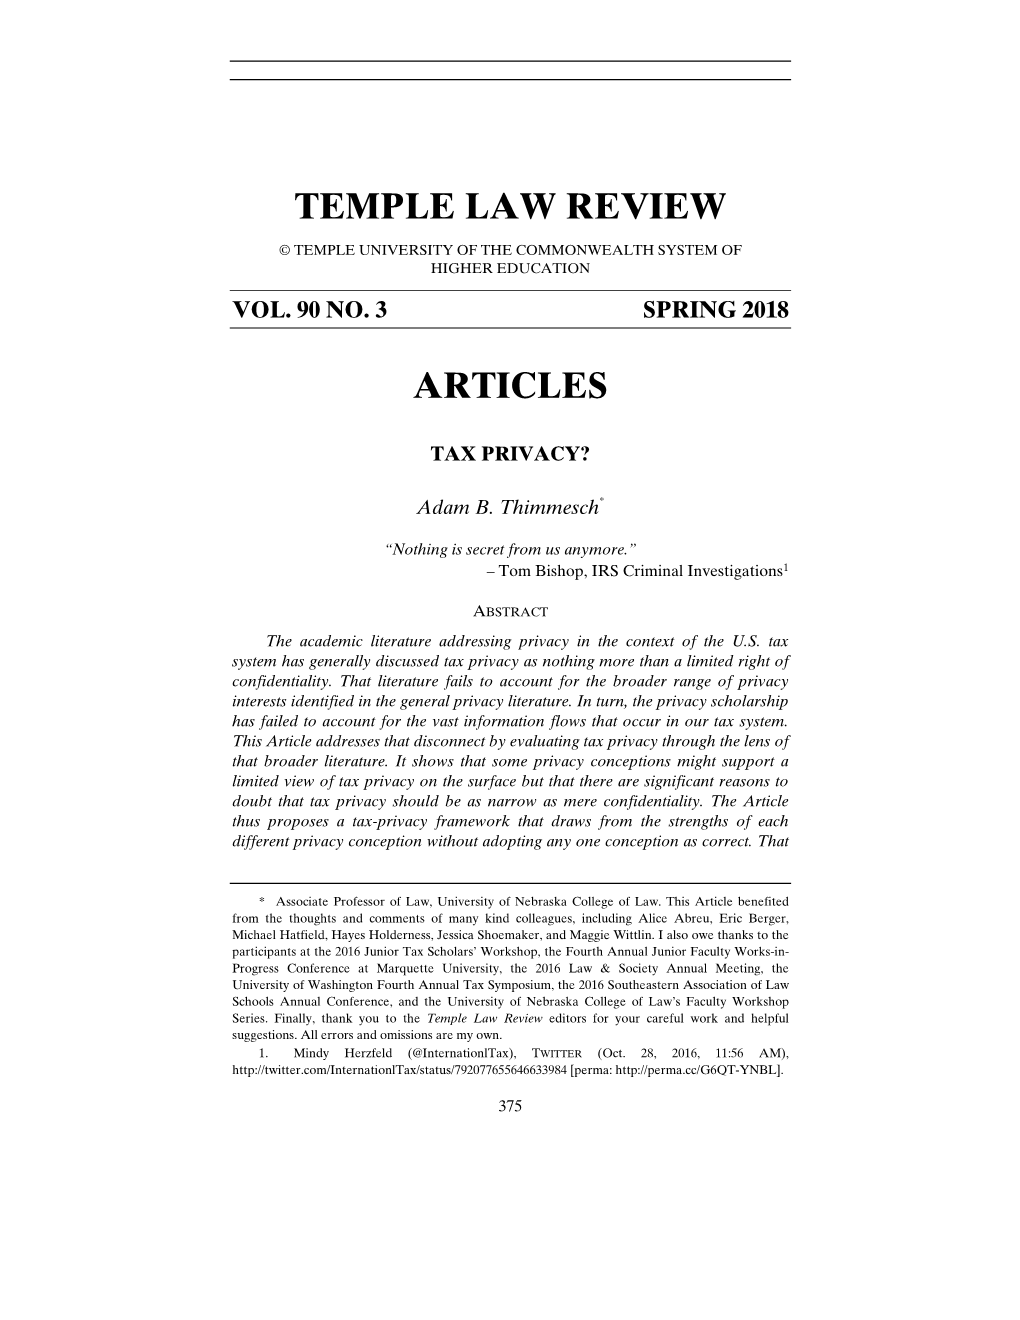 Temple Law Review Articles